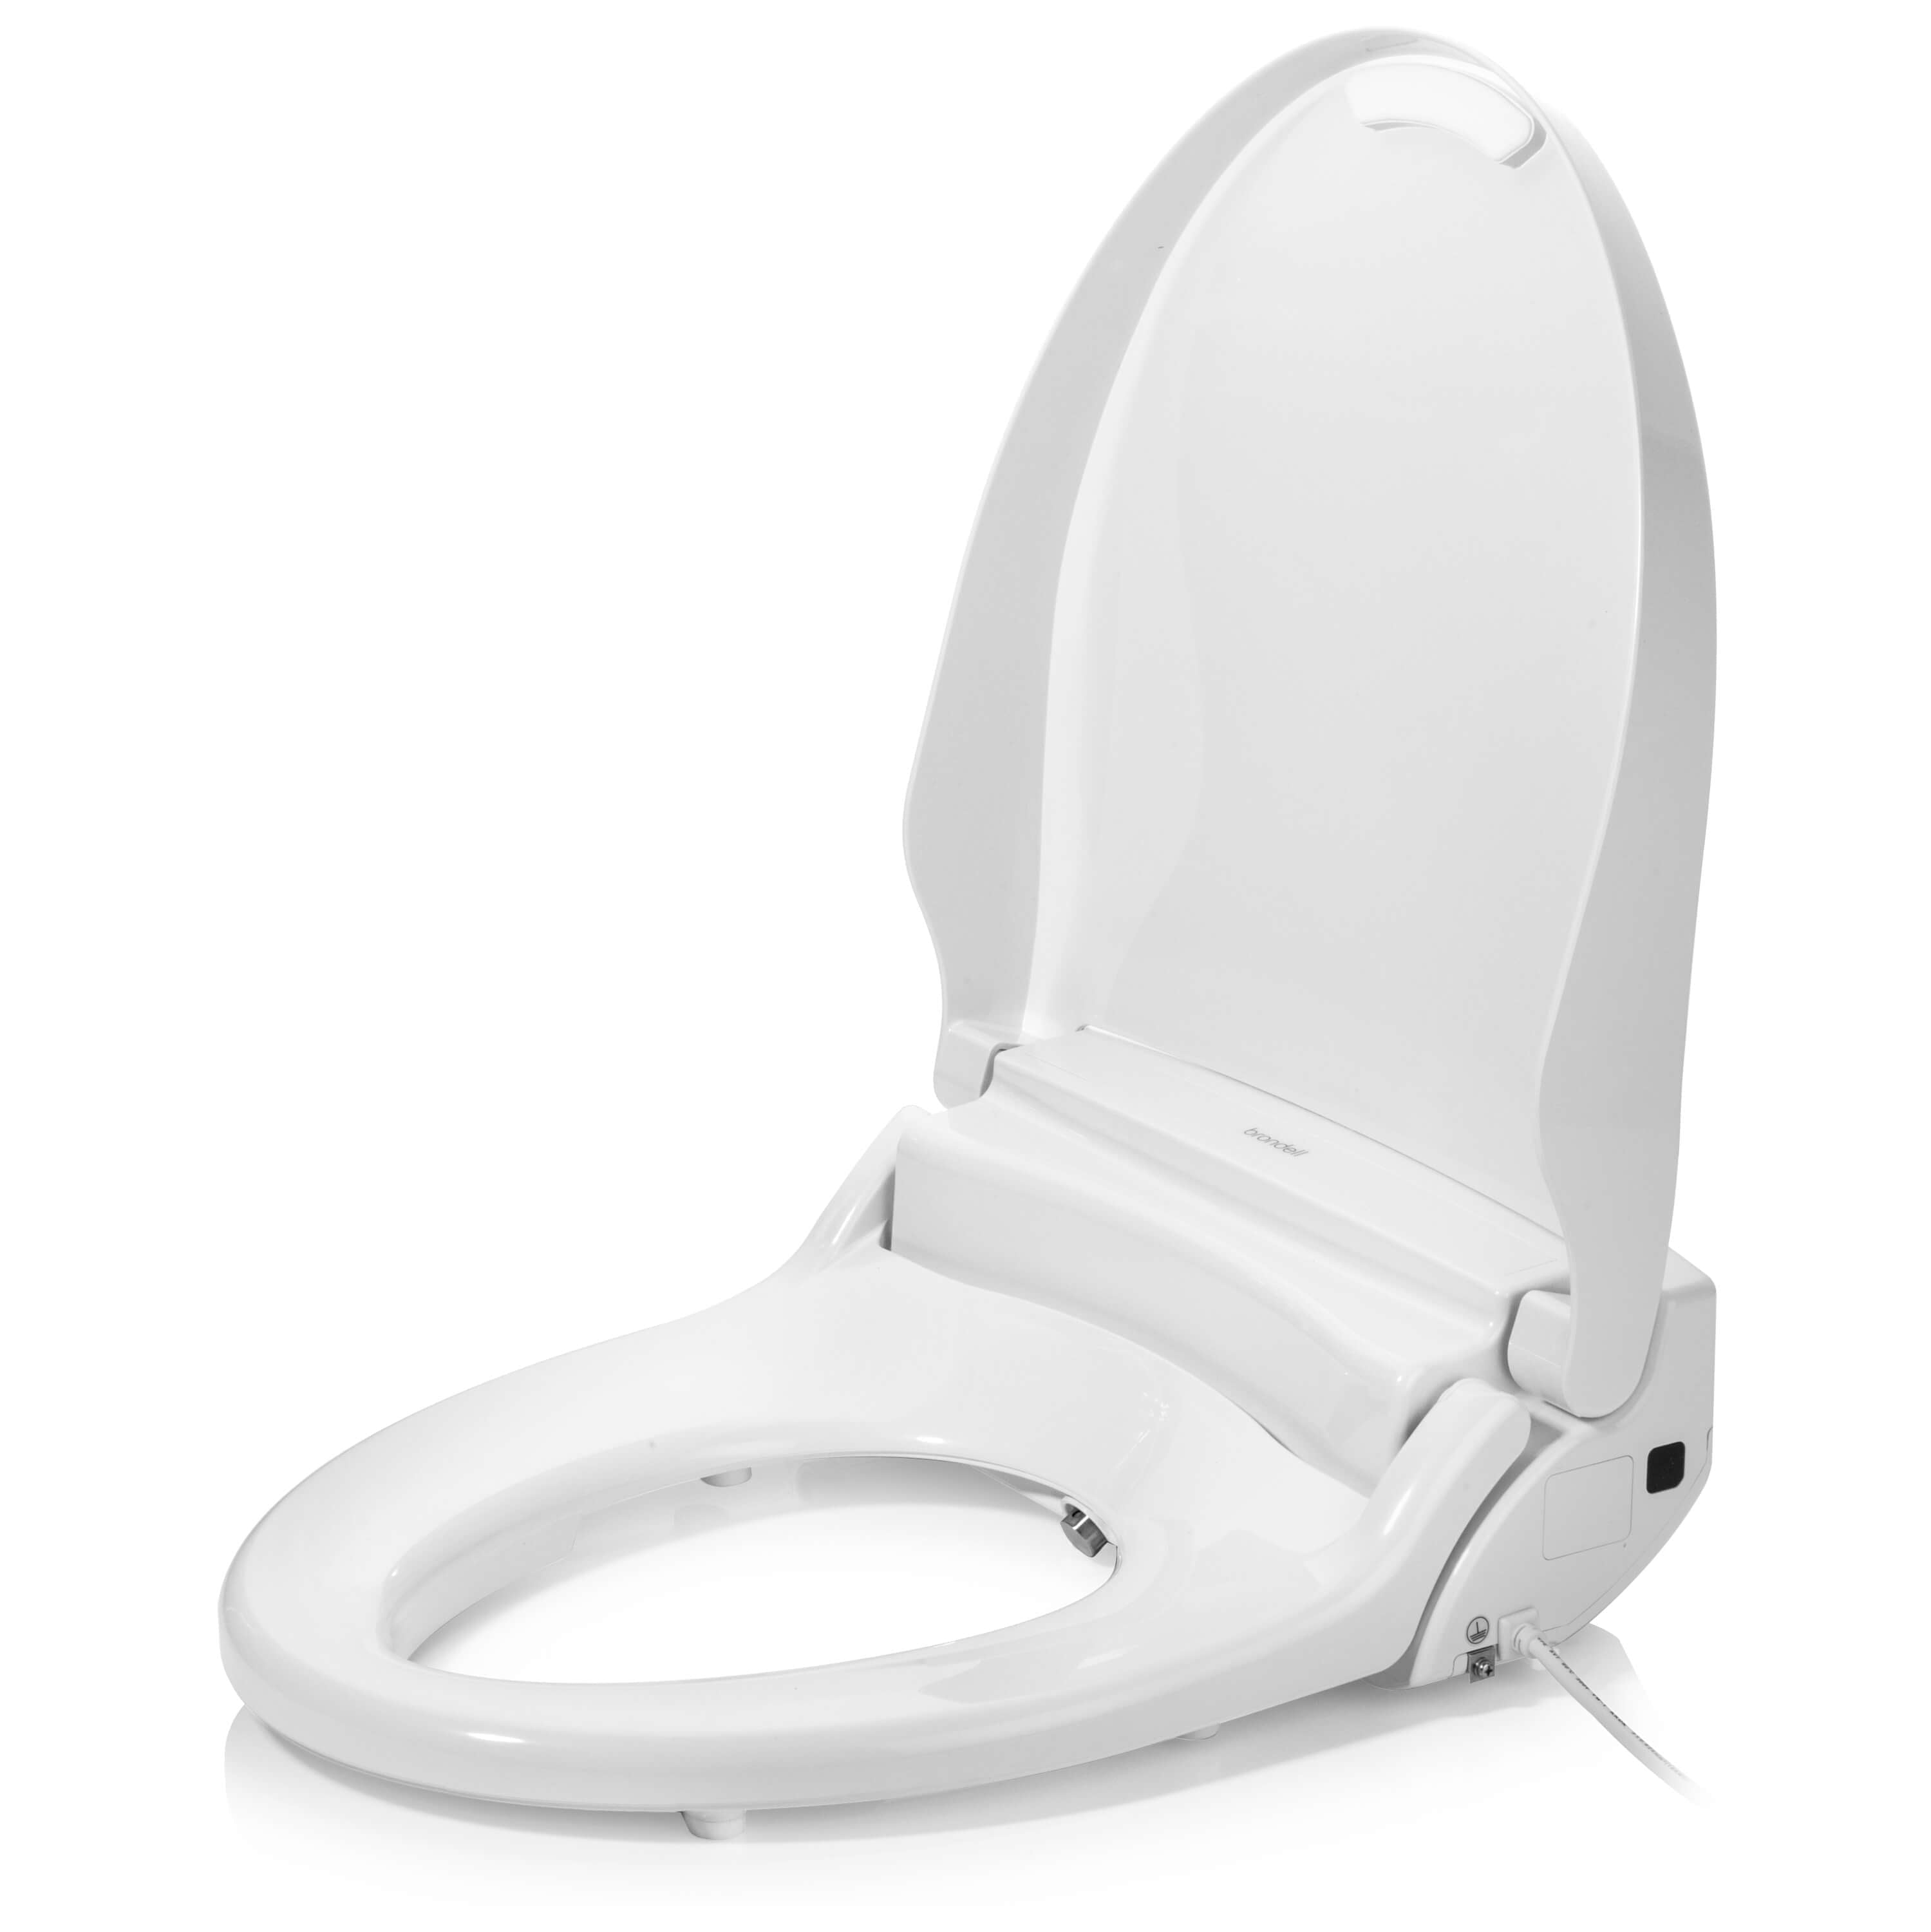 Brondell Swash Select DR802 Advanced Bidet Toilet Seat With Wireless Remote